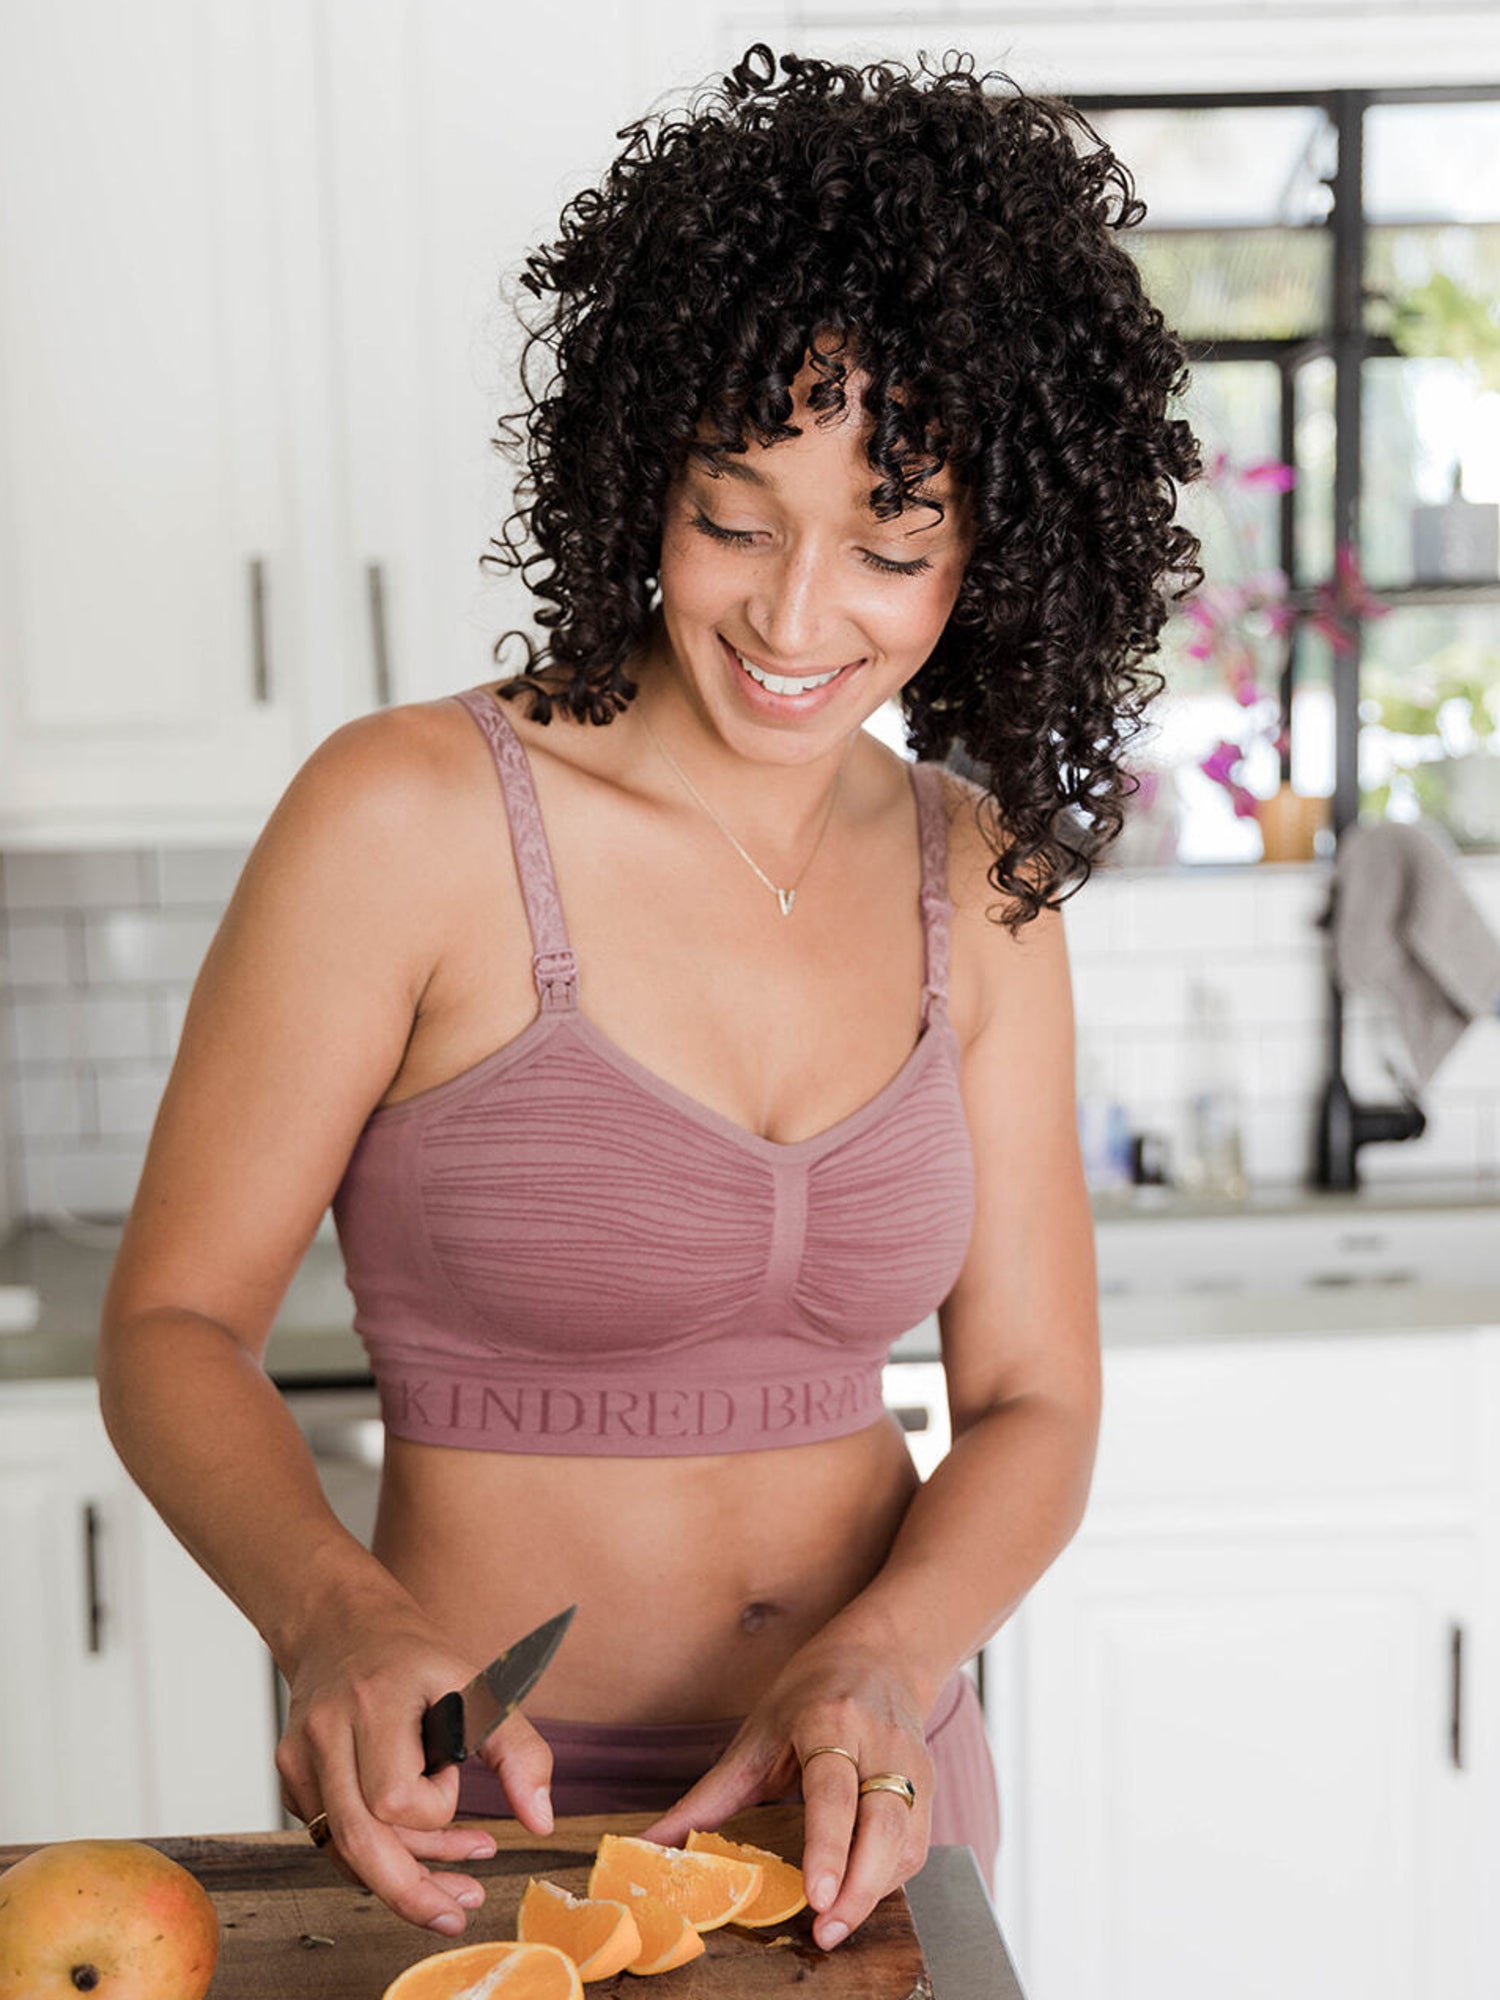 Kindred Bravely 2-Pack Hands Free Pumping Bra Bundle (Pink and